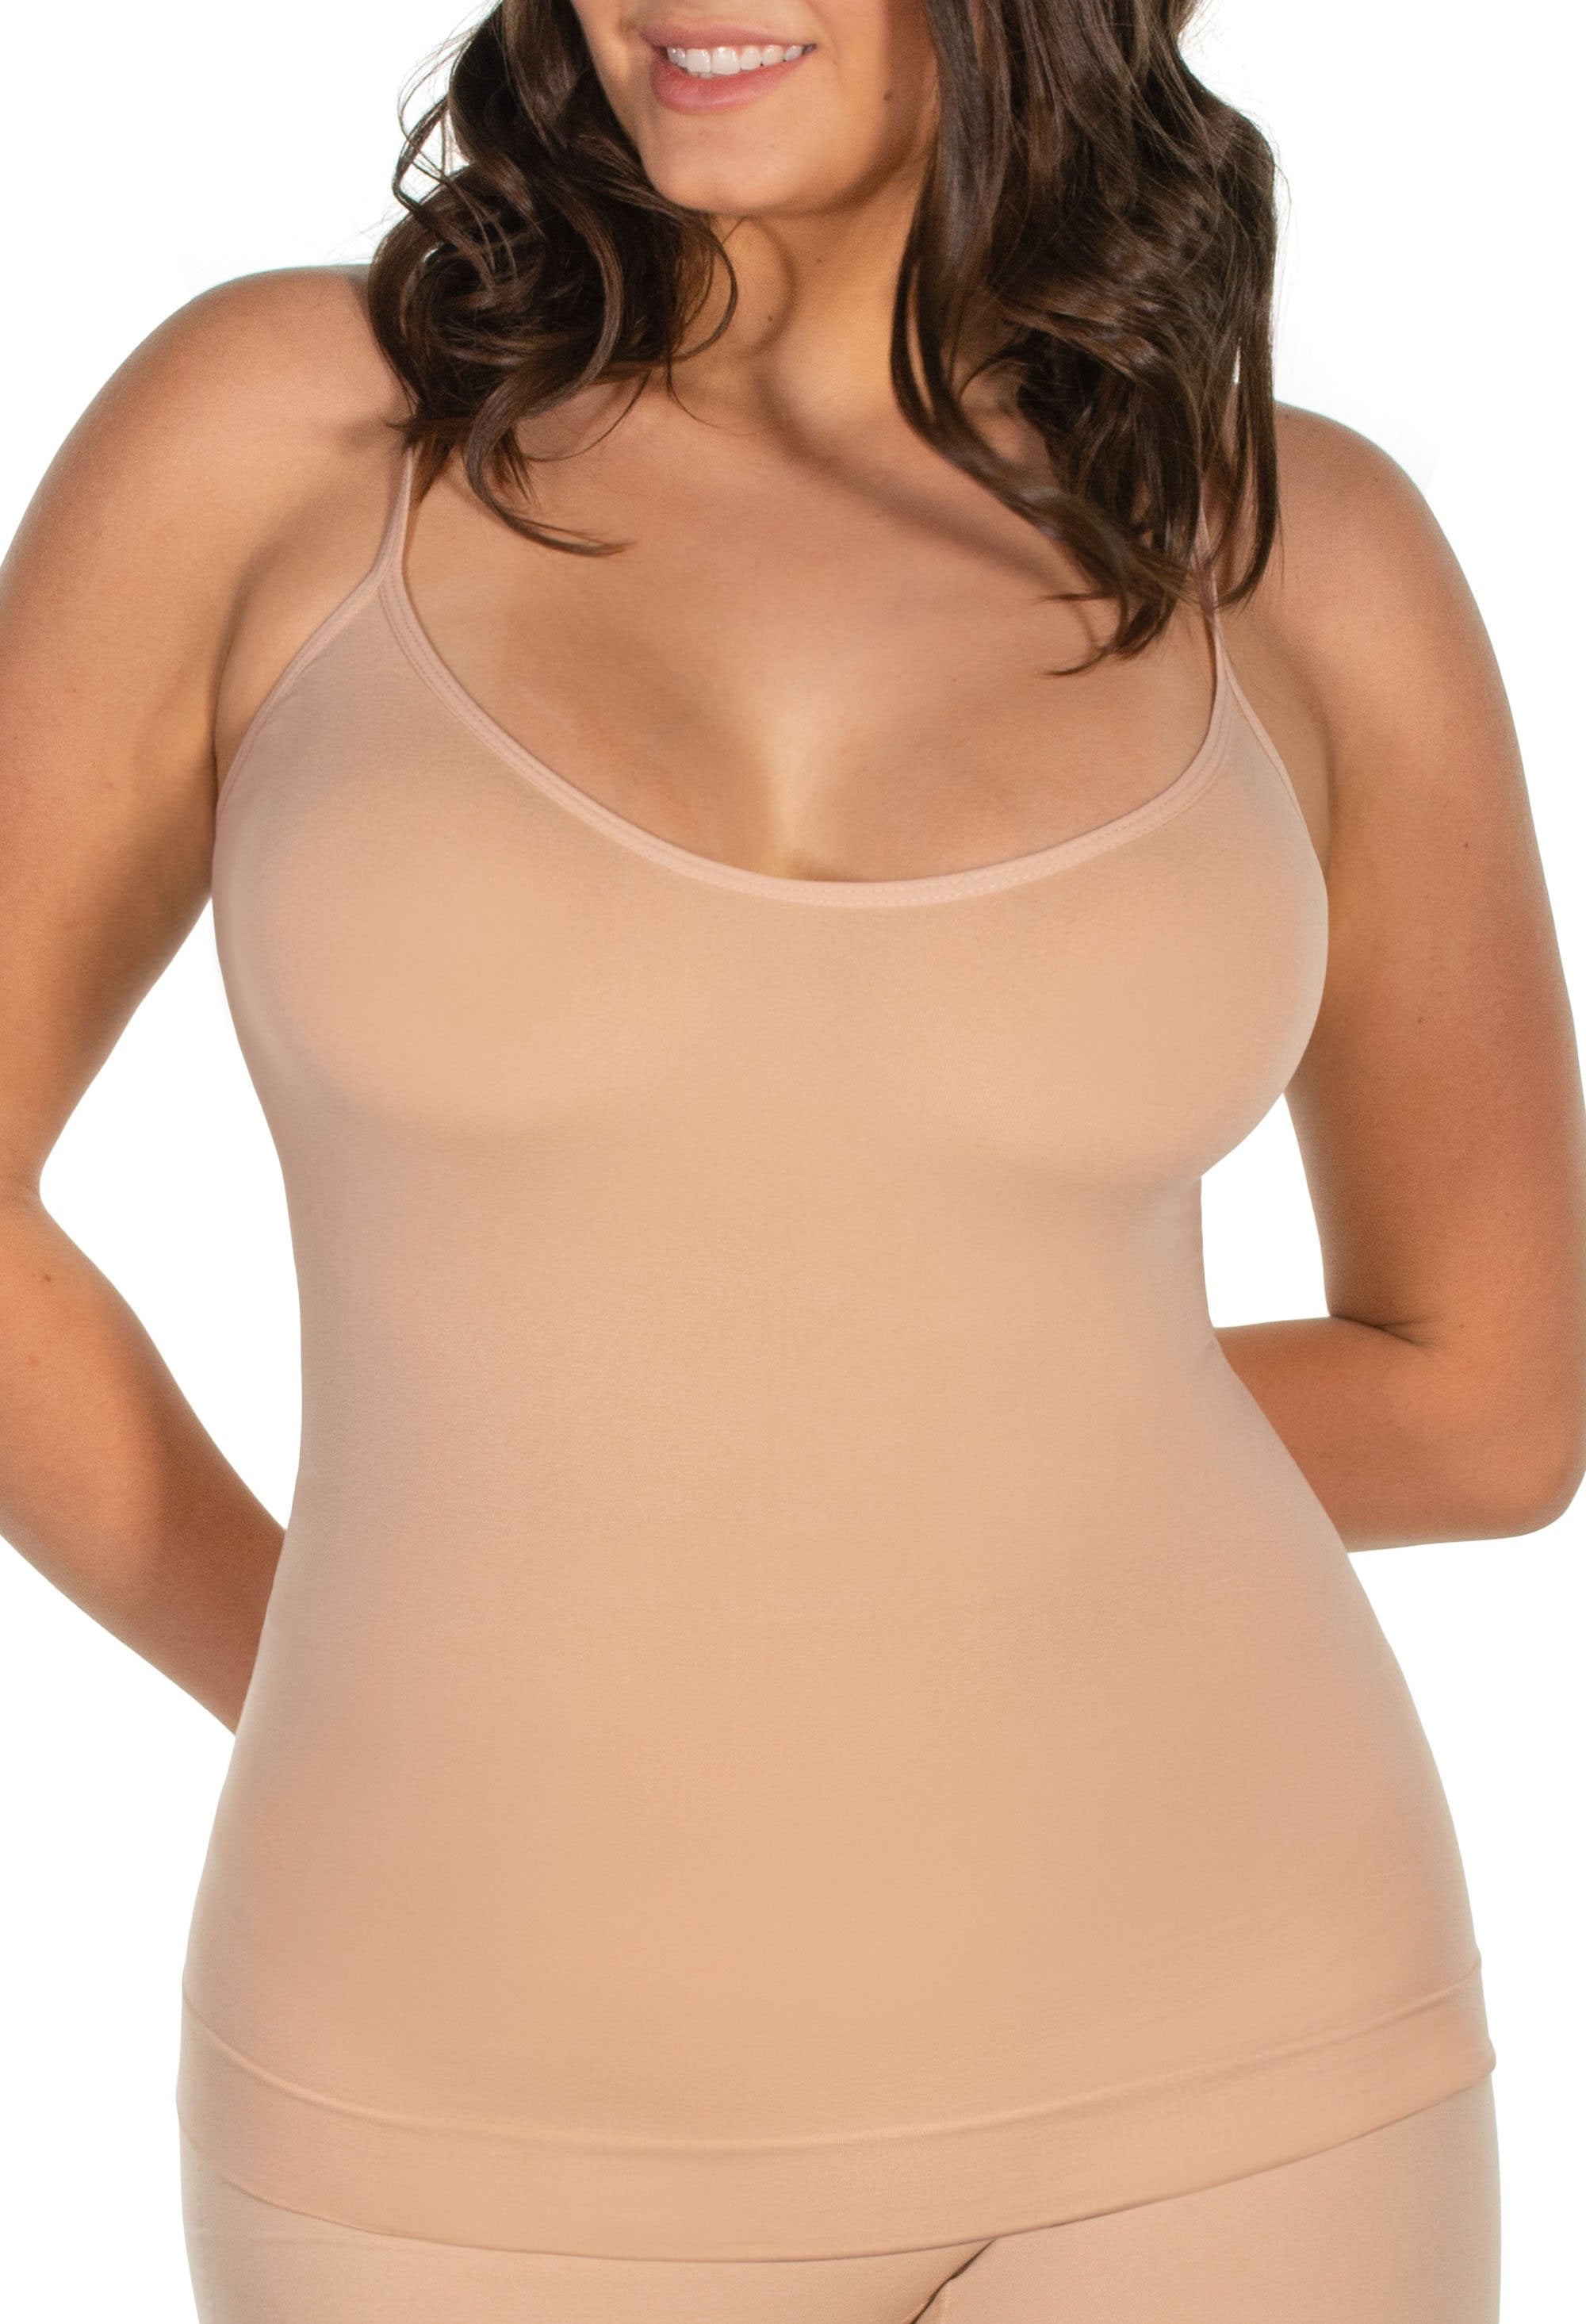 Cami Shaper is easy to wear - one piece curve hugging seamless